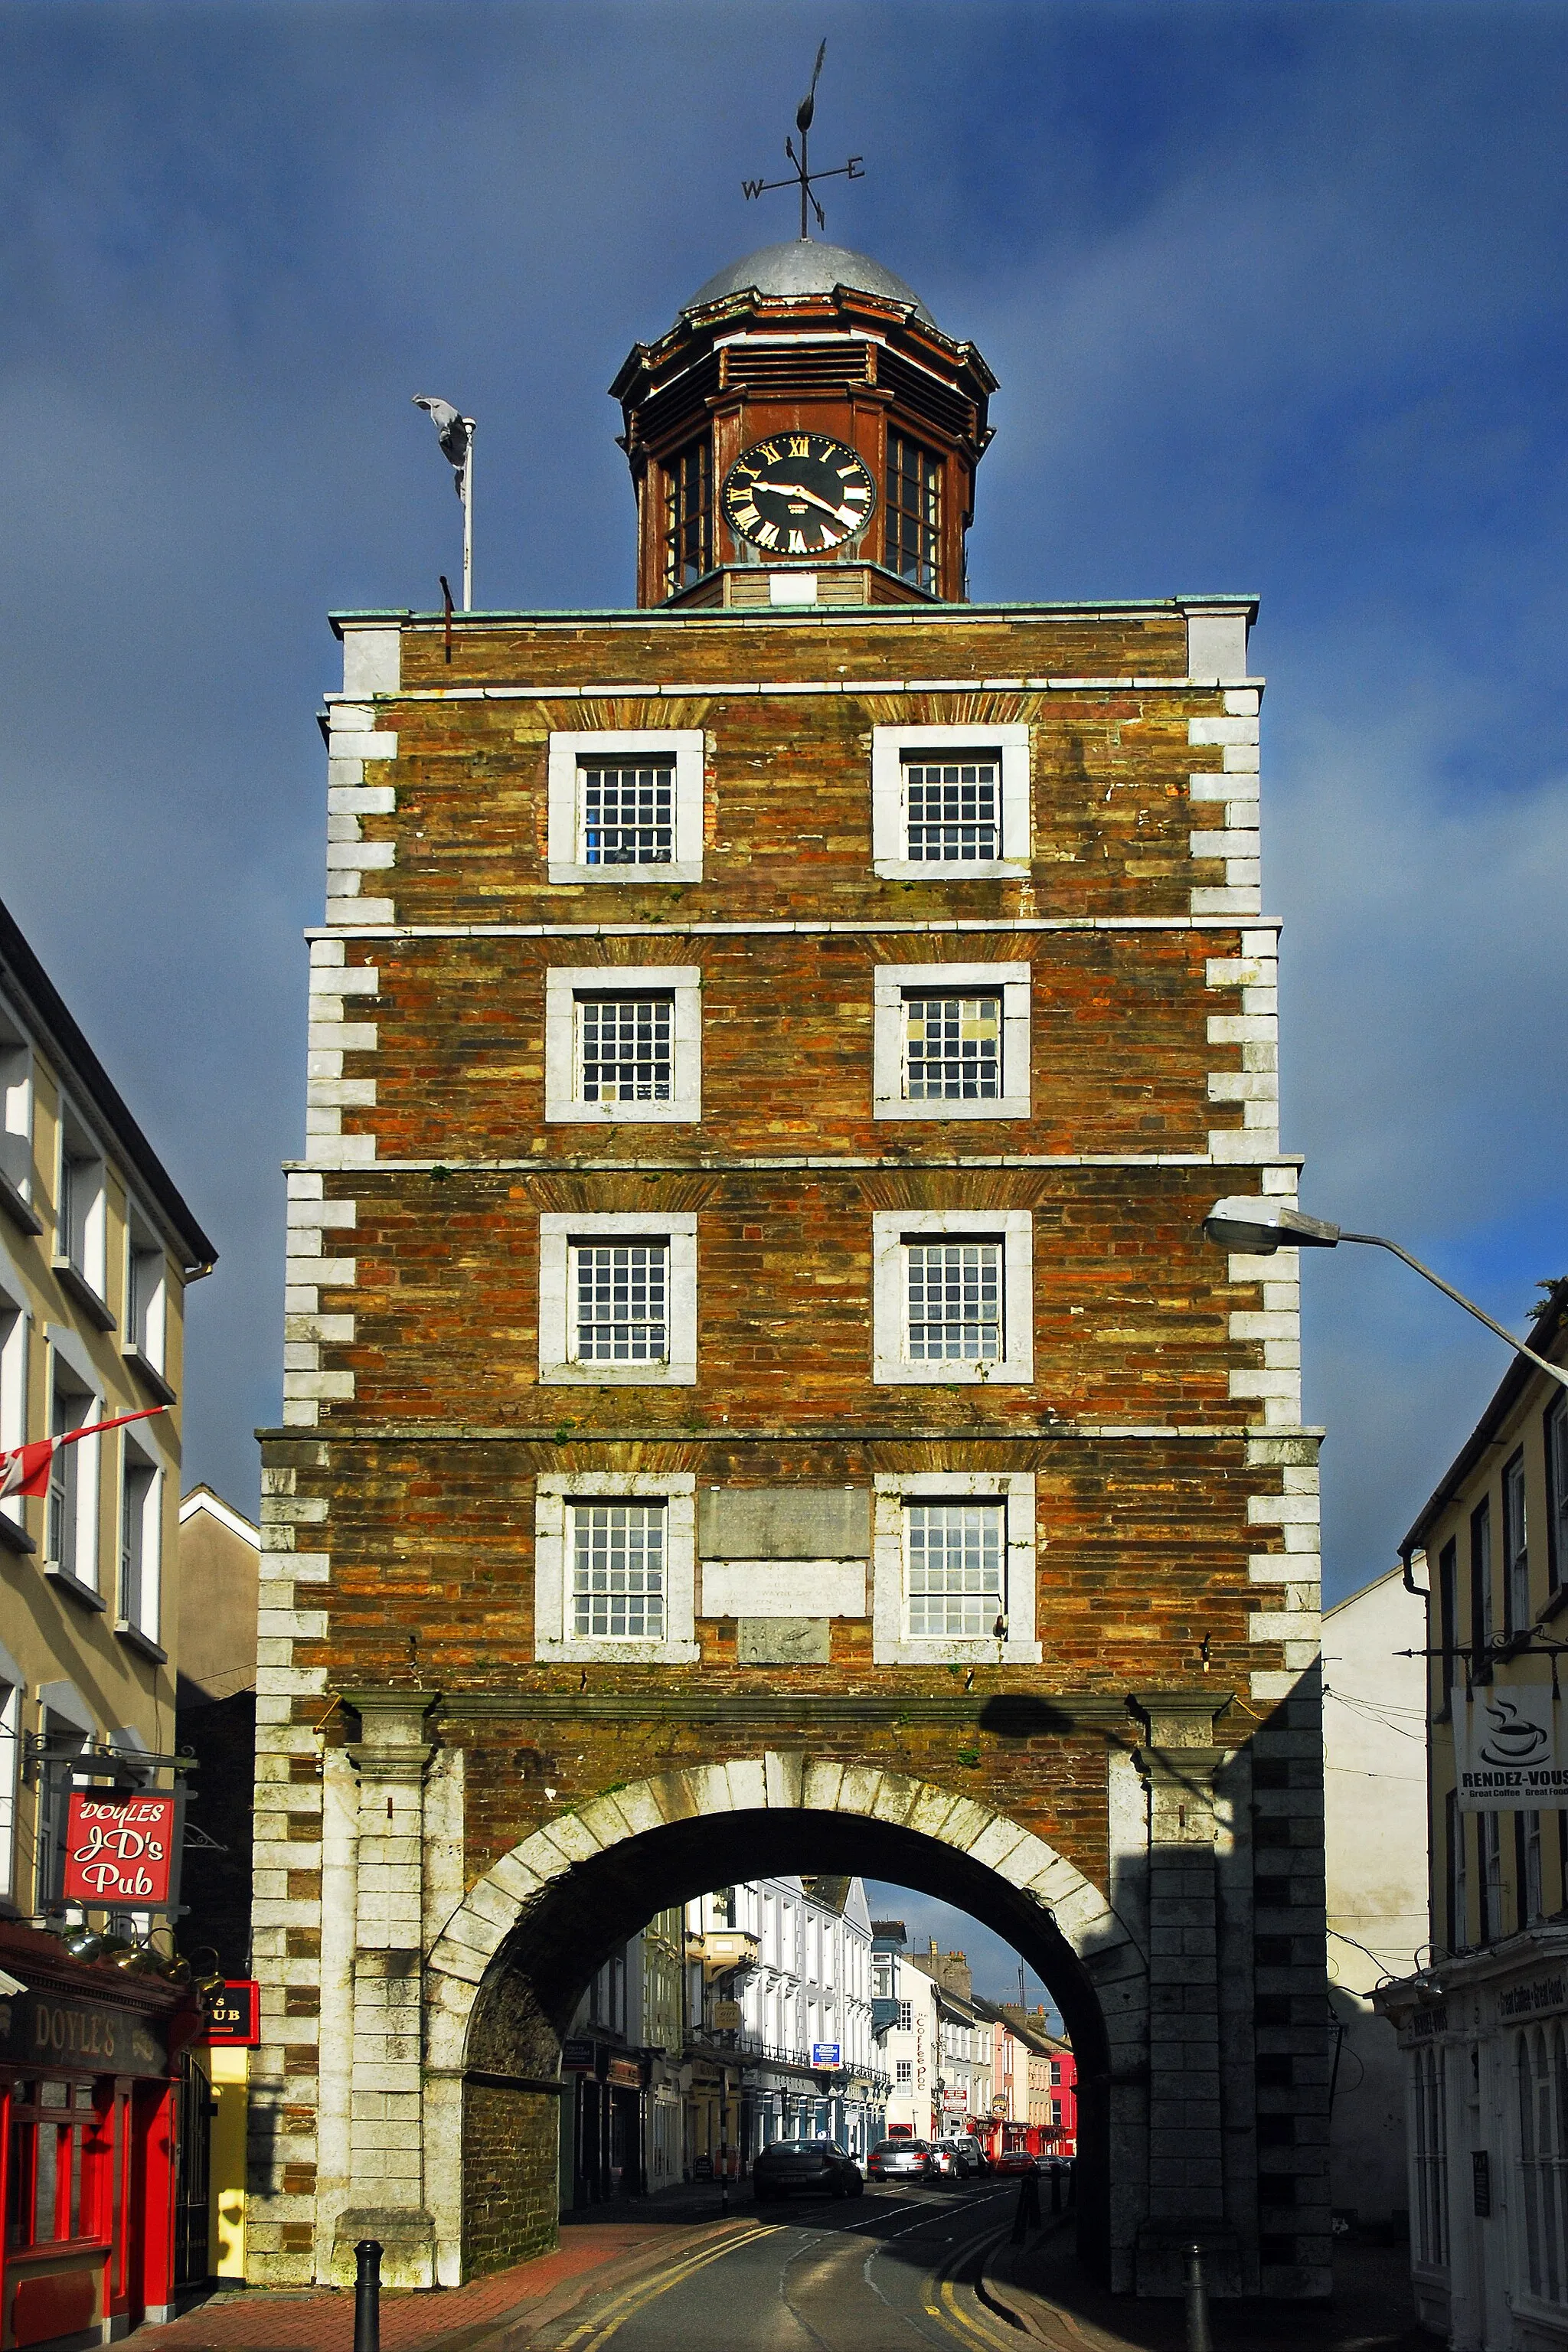 Photo showing: The Clock Gate, Youghal, Co. Cork